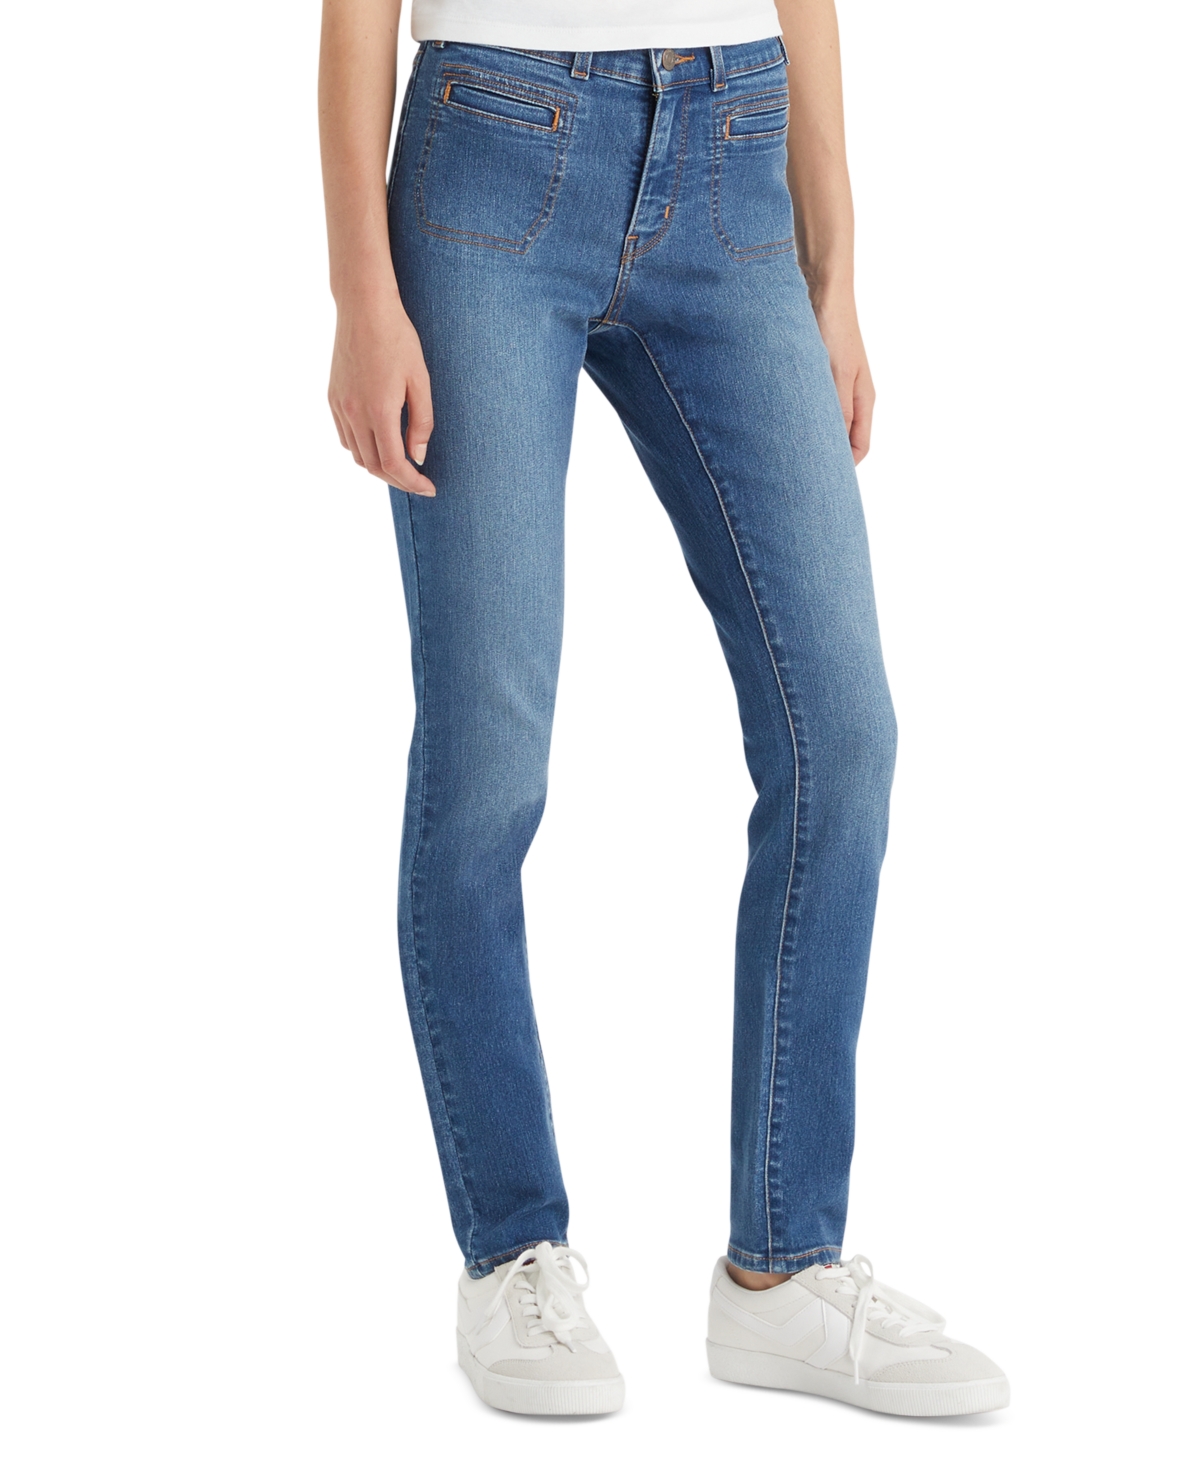 Women's 311 Welt-Pocket Shaping Skinny Jeans - Beginning To The End